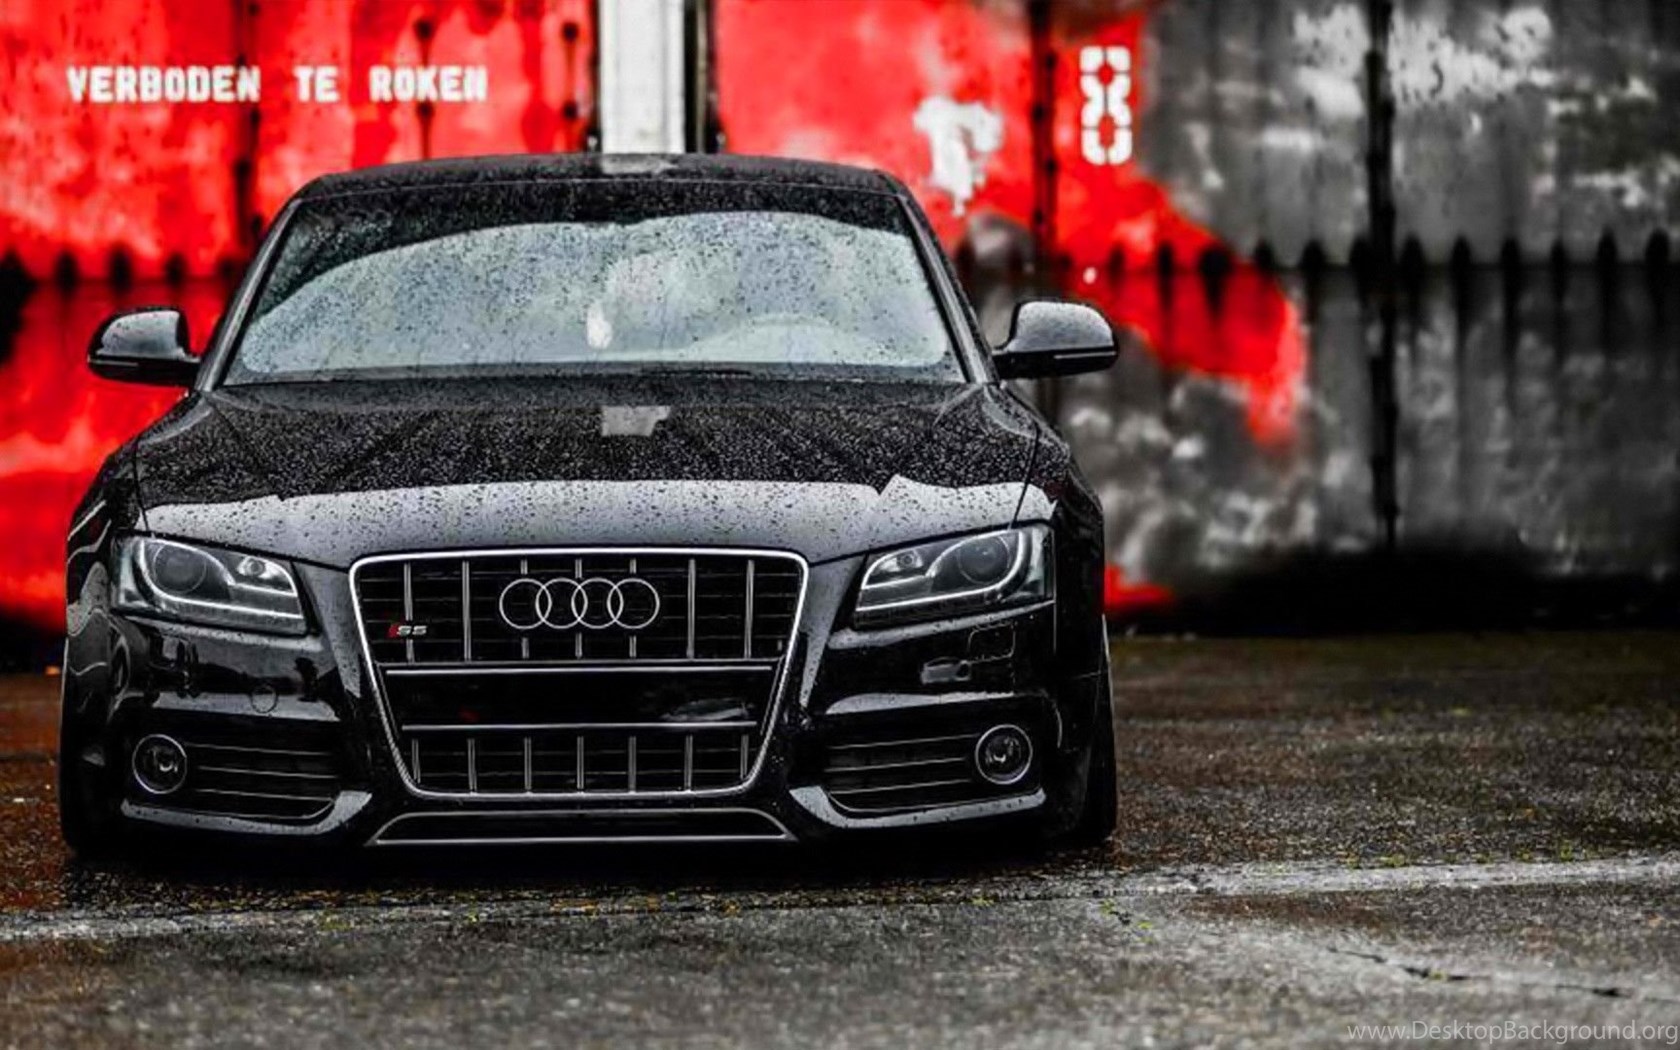 43 Audi Wallpapers Backgrounds In Hd For Free Download Desktop Background